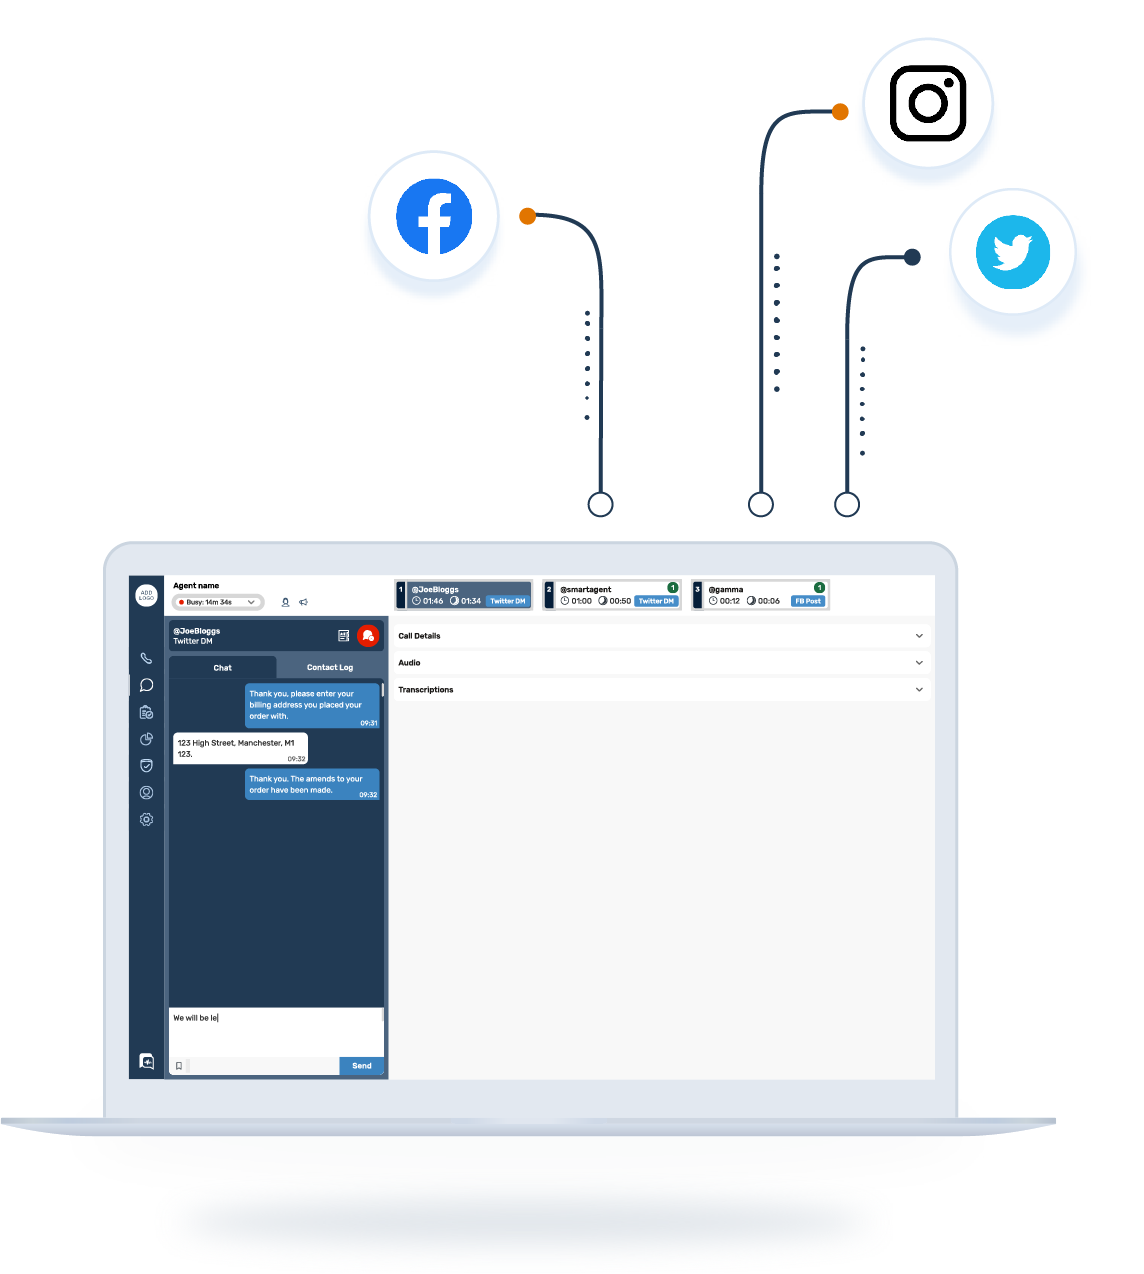 Graphic of social media channel in SmartAgent with key social icons